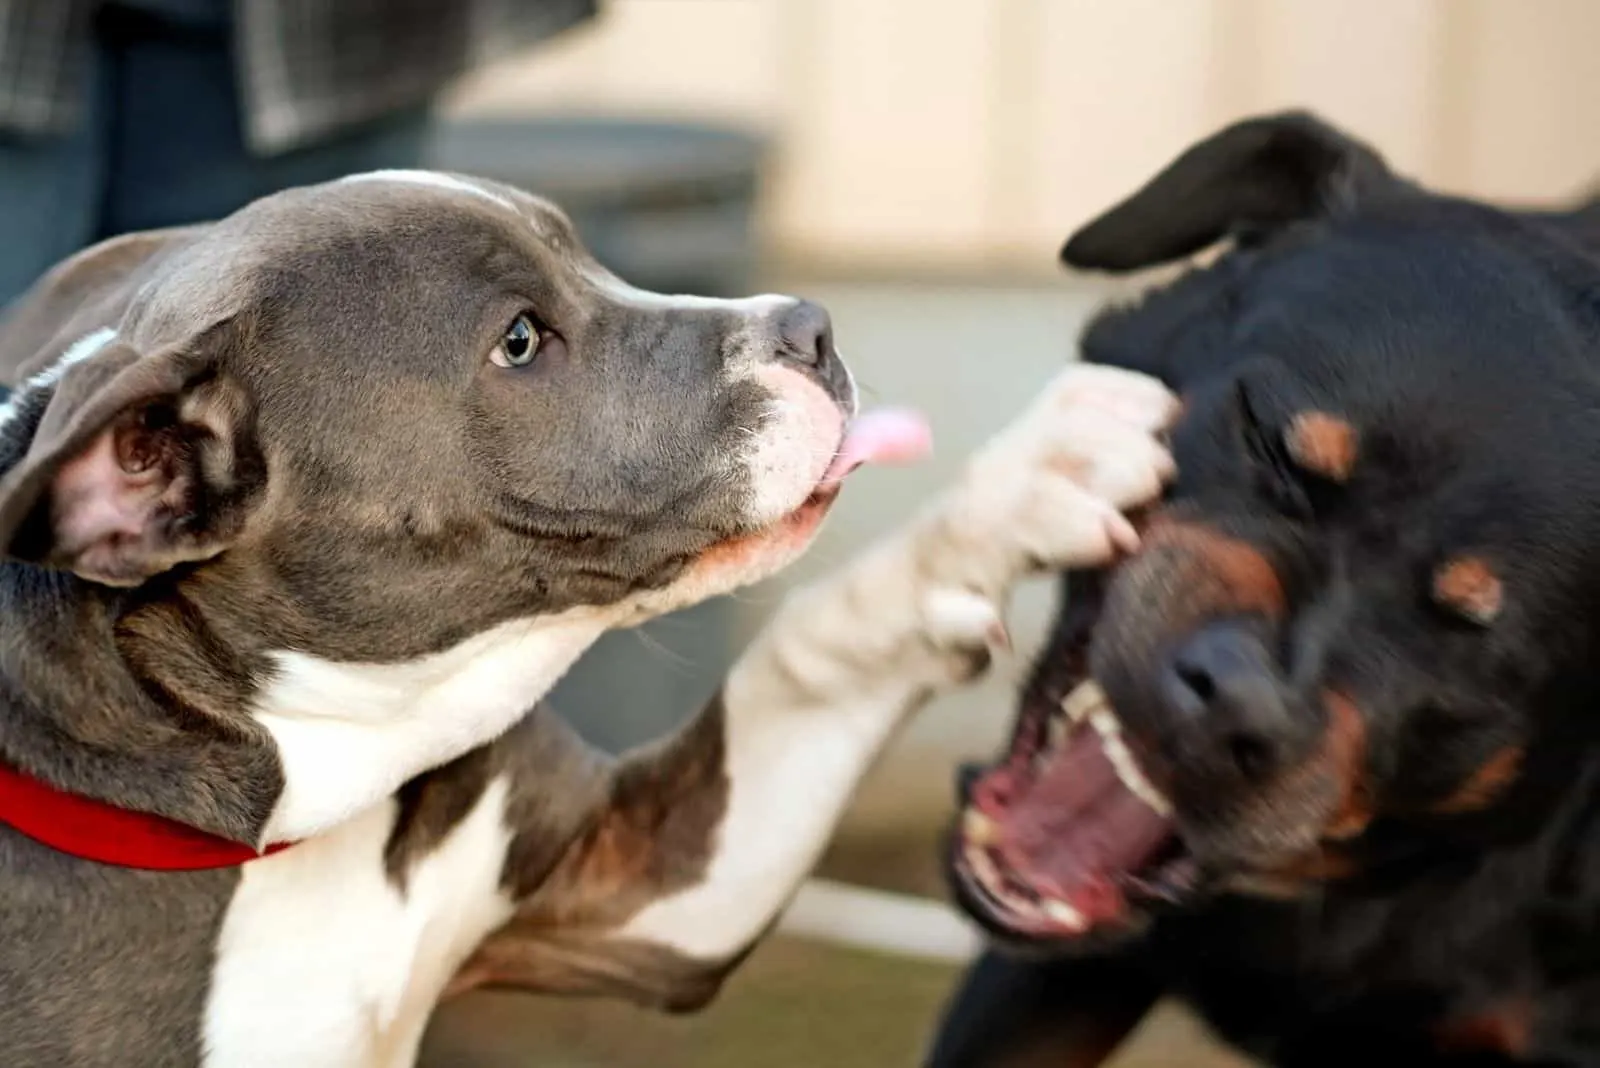 pitbull and rottweiler dogs playing and fighting